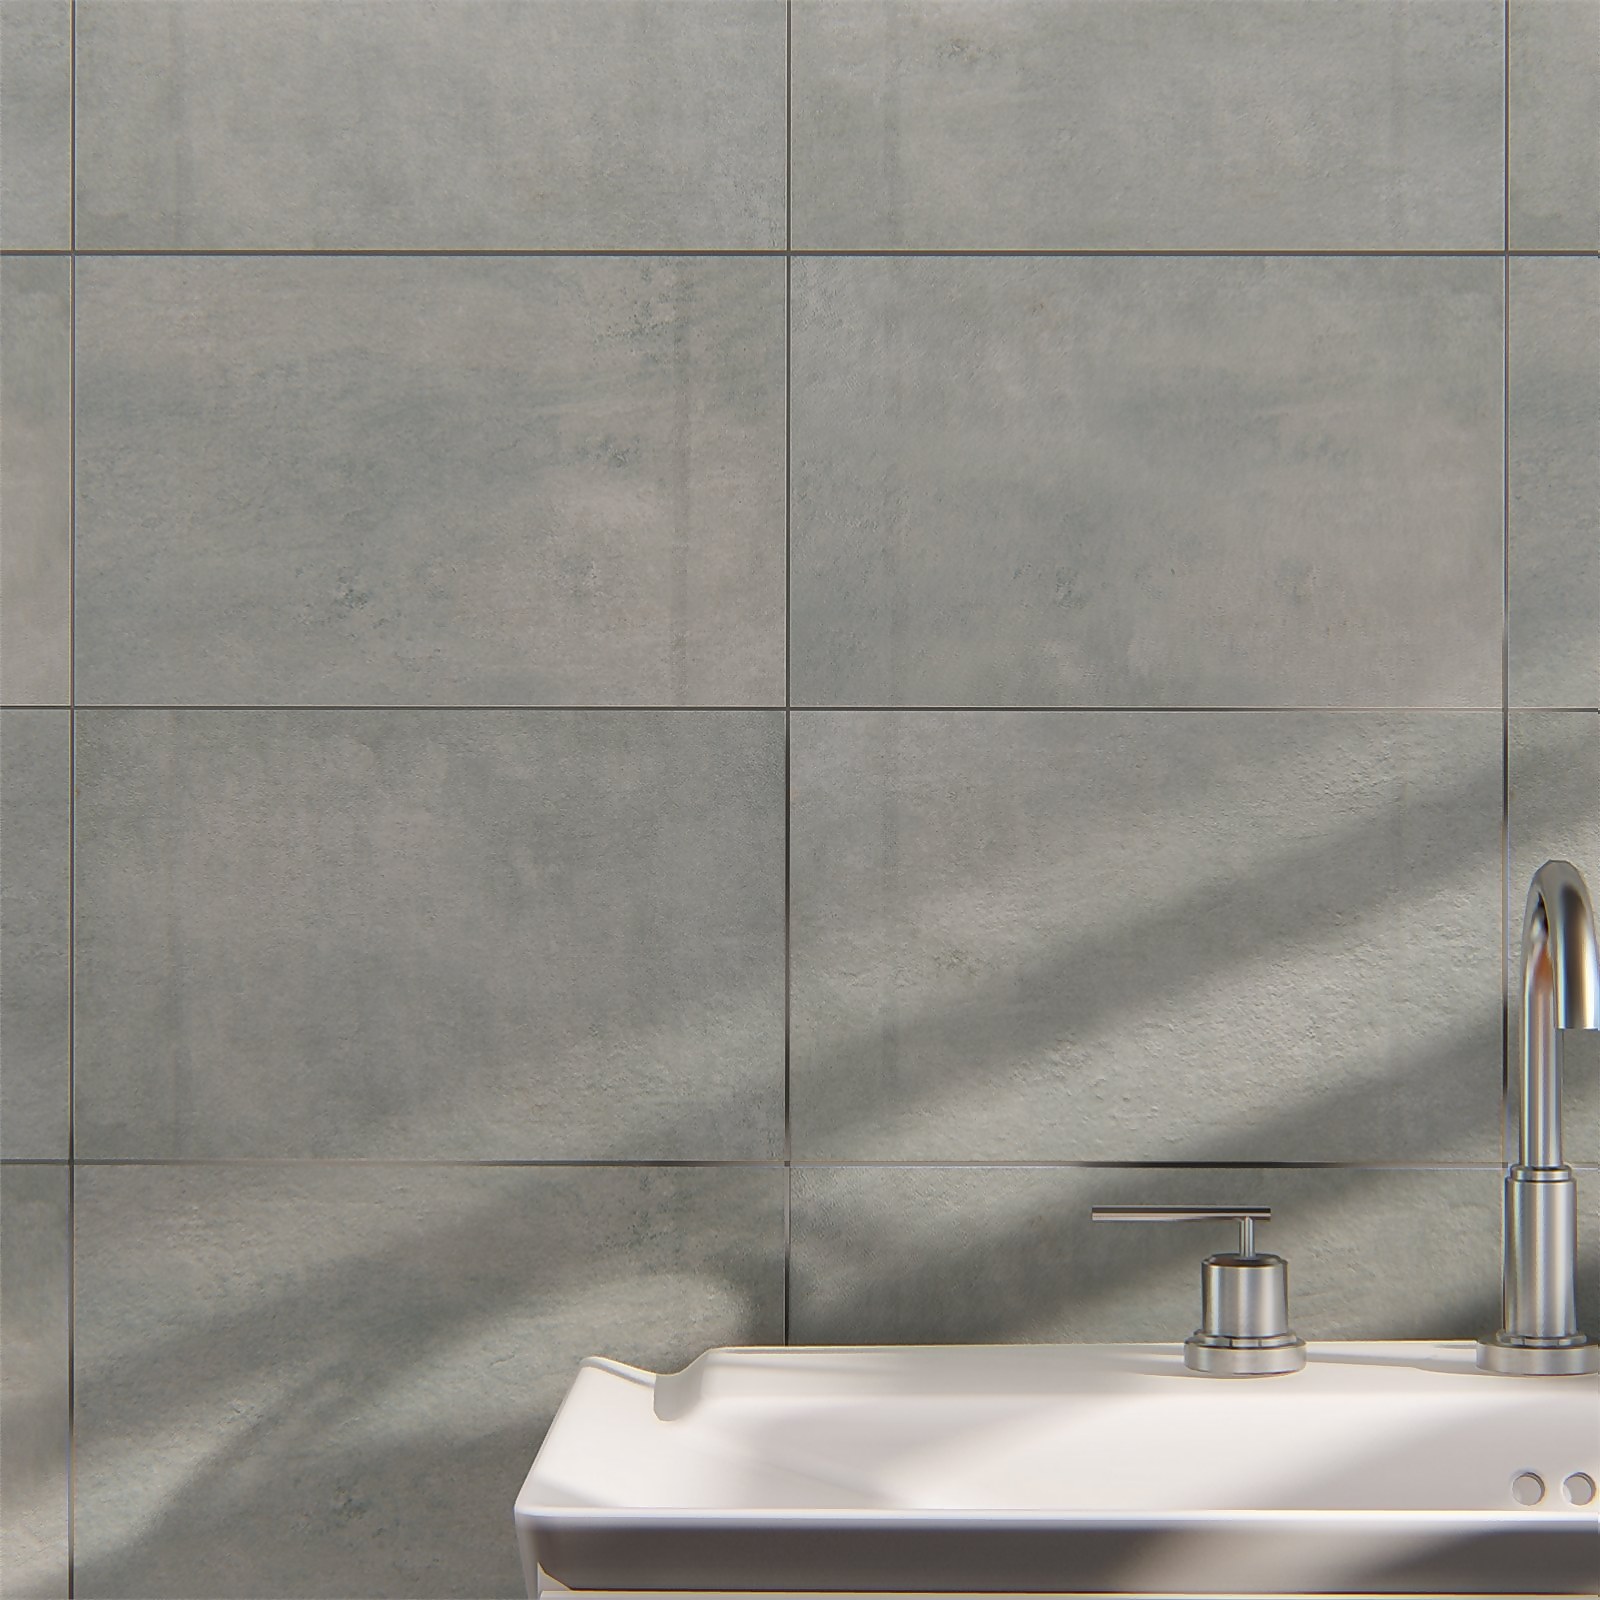 Photo of Ashbourne Concrete Ceramic Wall Tile 250 X 400mm - 1sqm Pack